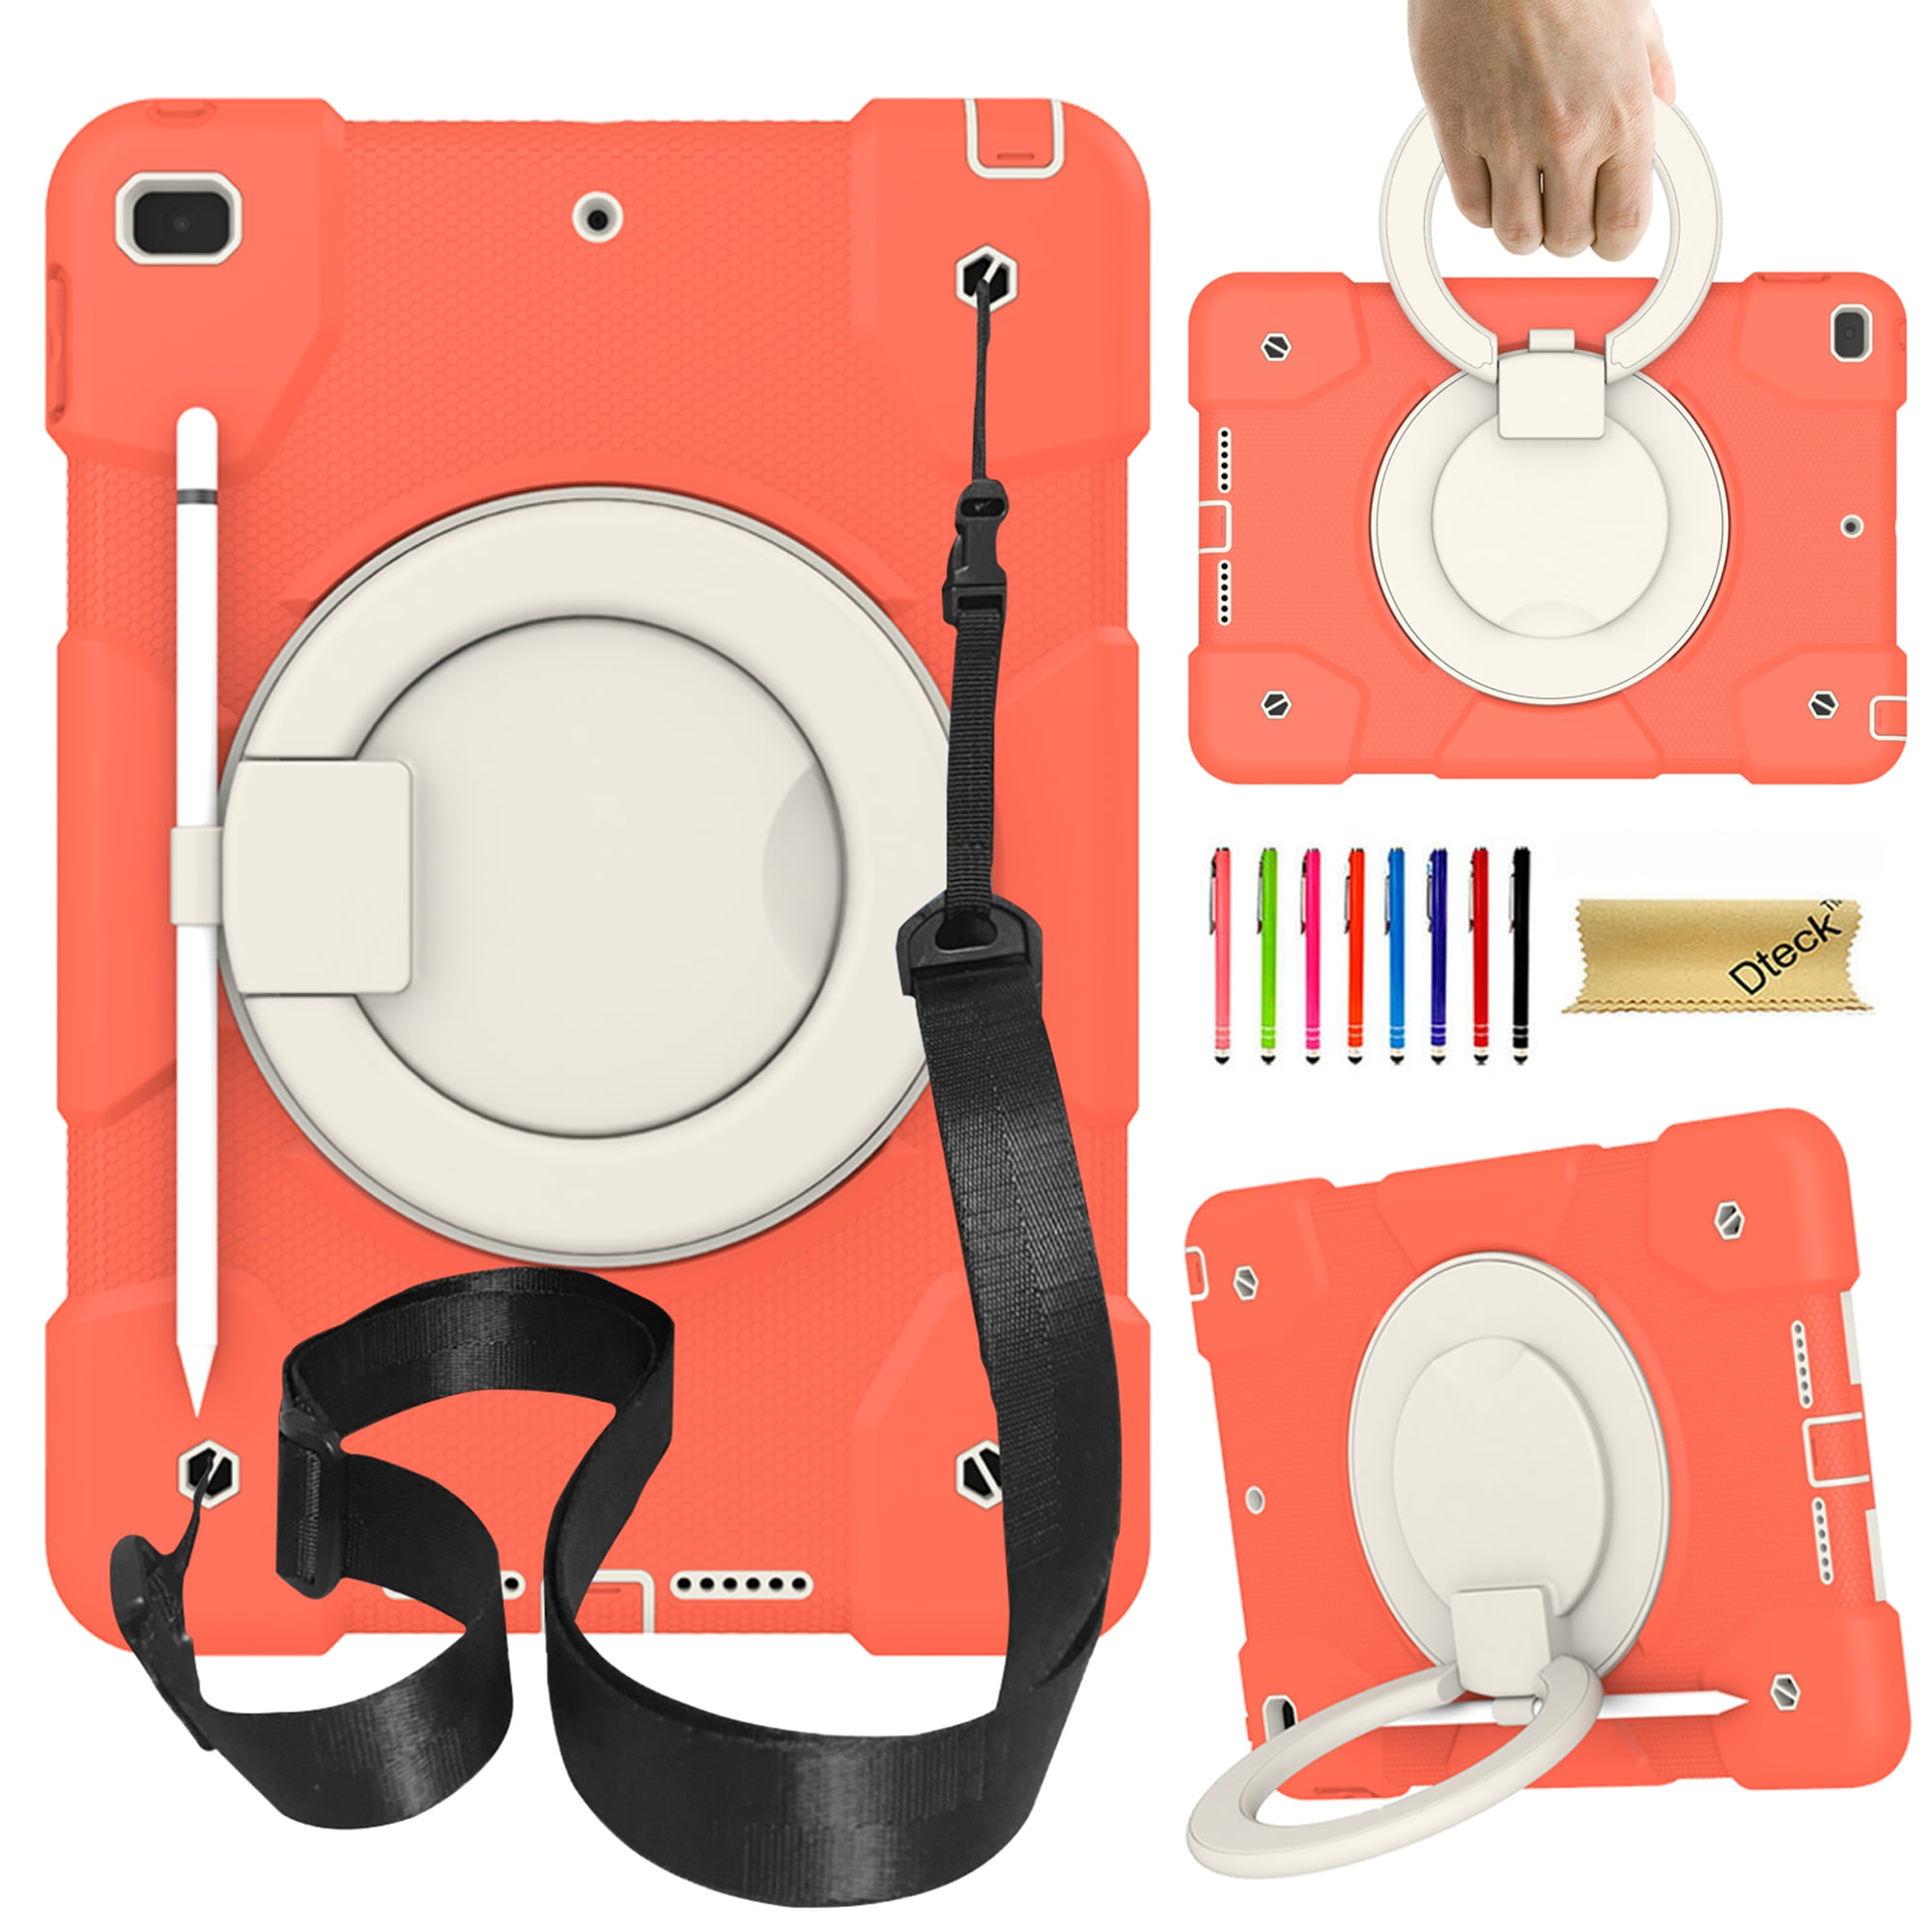 iPad 10.2 inch Case, iPad 9th/8th/7th Gen Case with 360° Ring Holder, Dteck  Heavy Duty 3 in 1 Shockproof Bumper Full Body Drop Protection with